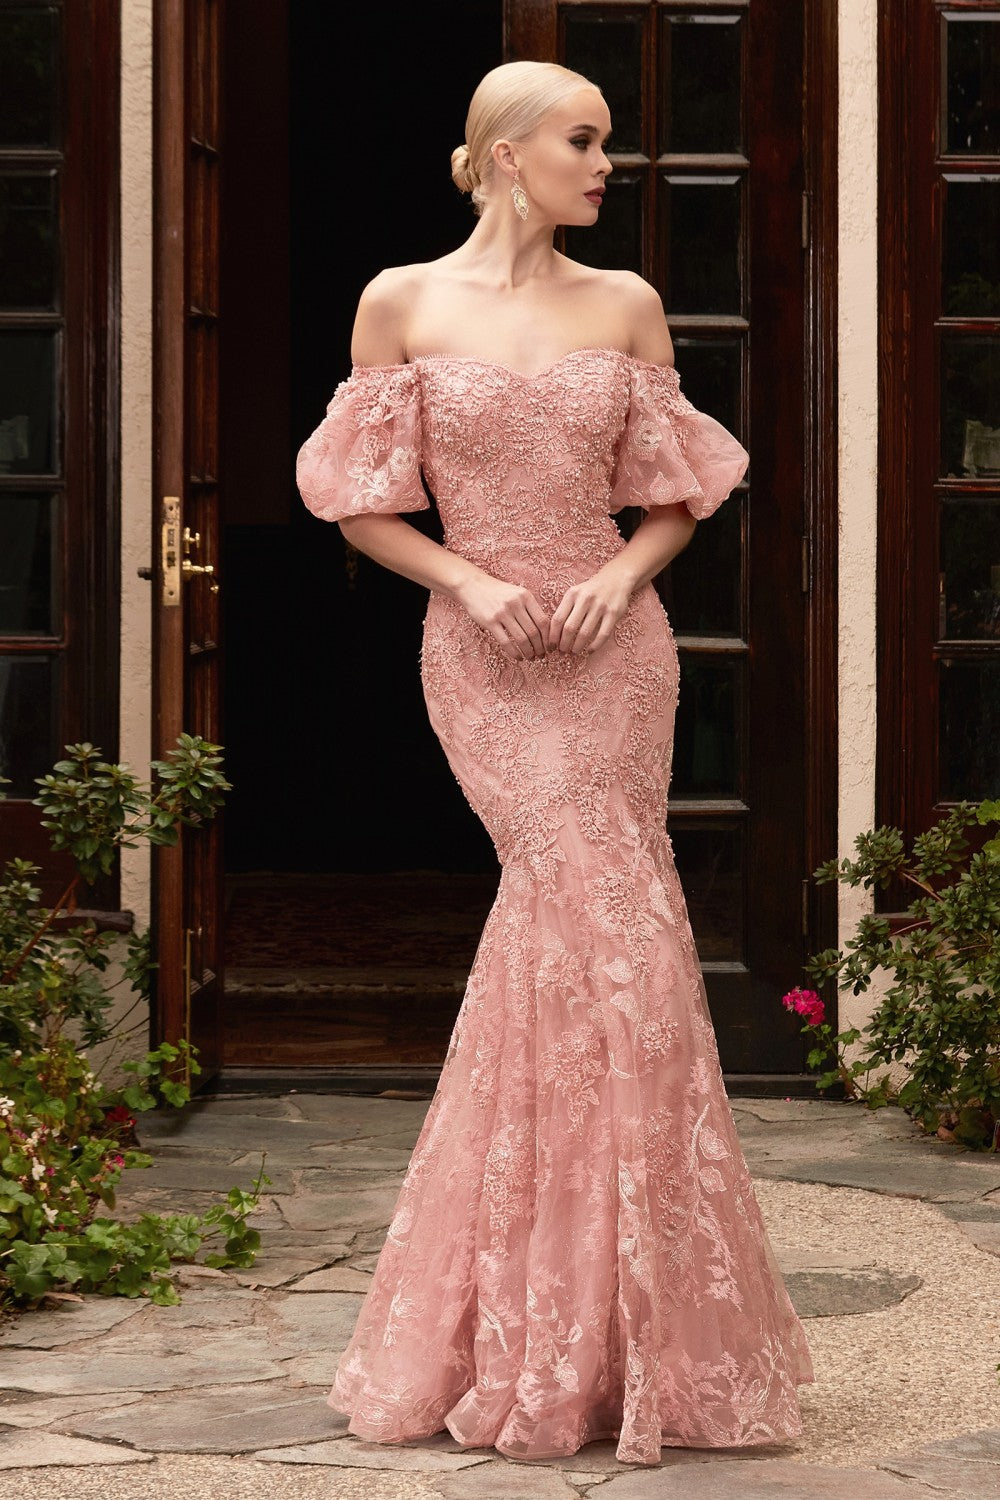 Dusty Rose Plunging Neck 3/4 Sleeves Slit A-line Prom Dress